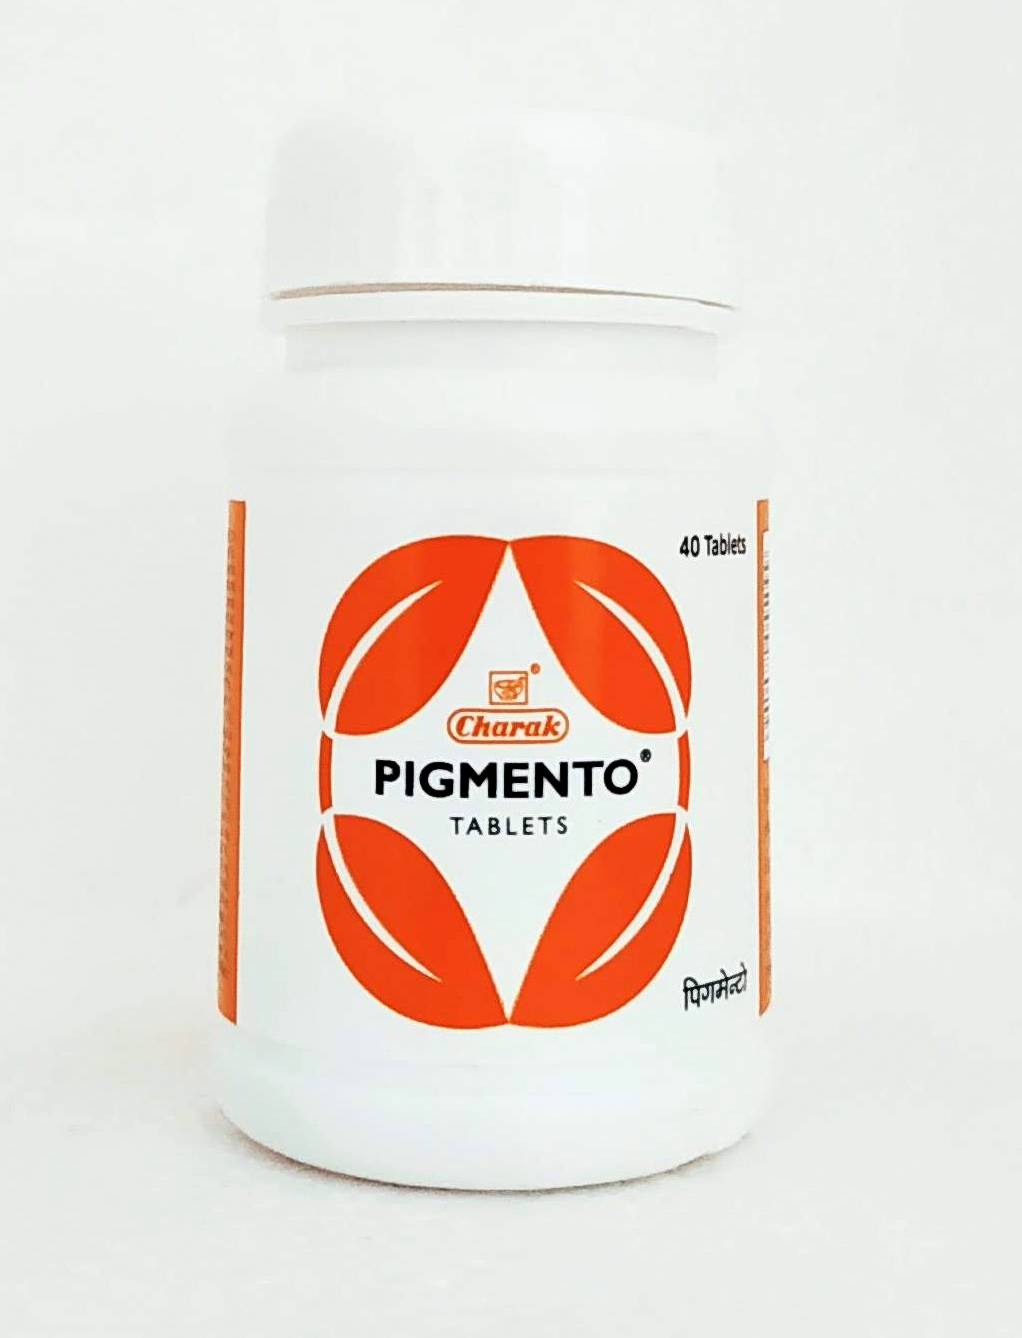 Shop Pigmento tablets - 40tablets at price 144.00 from Charak Online - Ayush Care